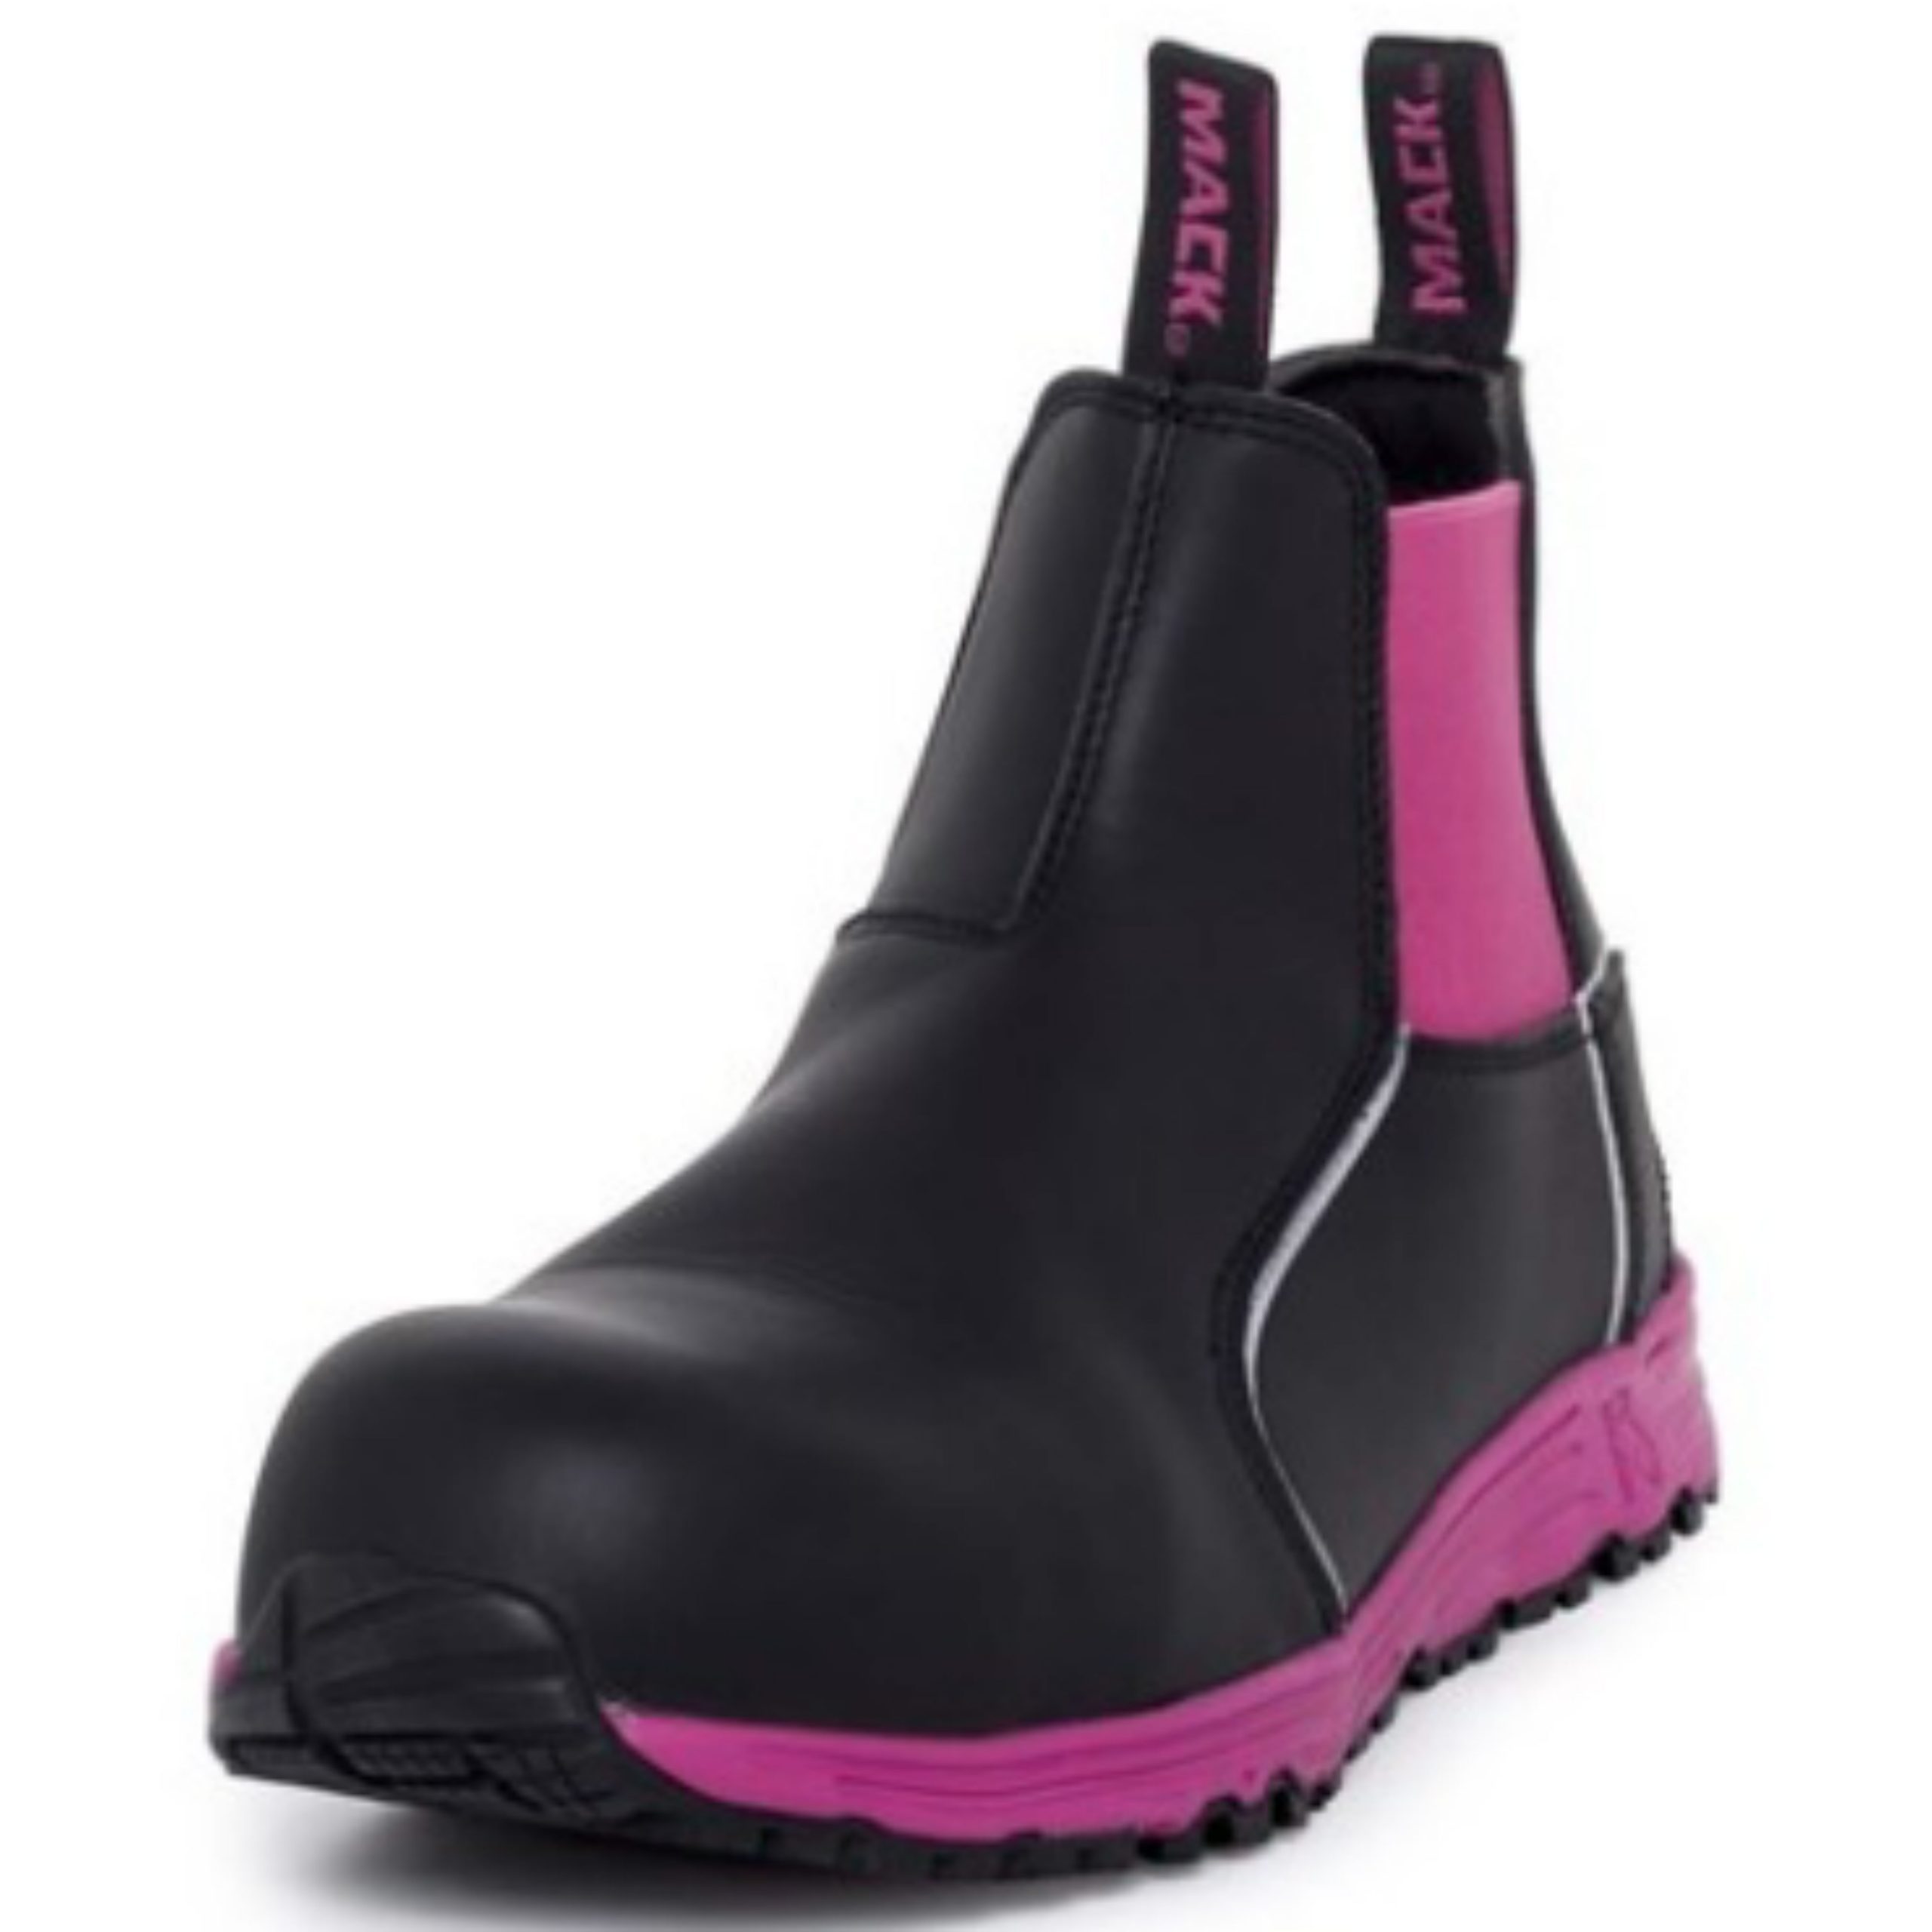 Mack Fuel Womens Slip-On Safety Boots 